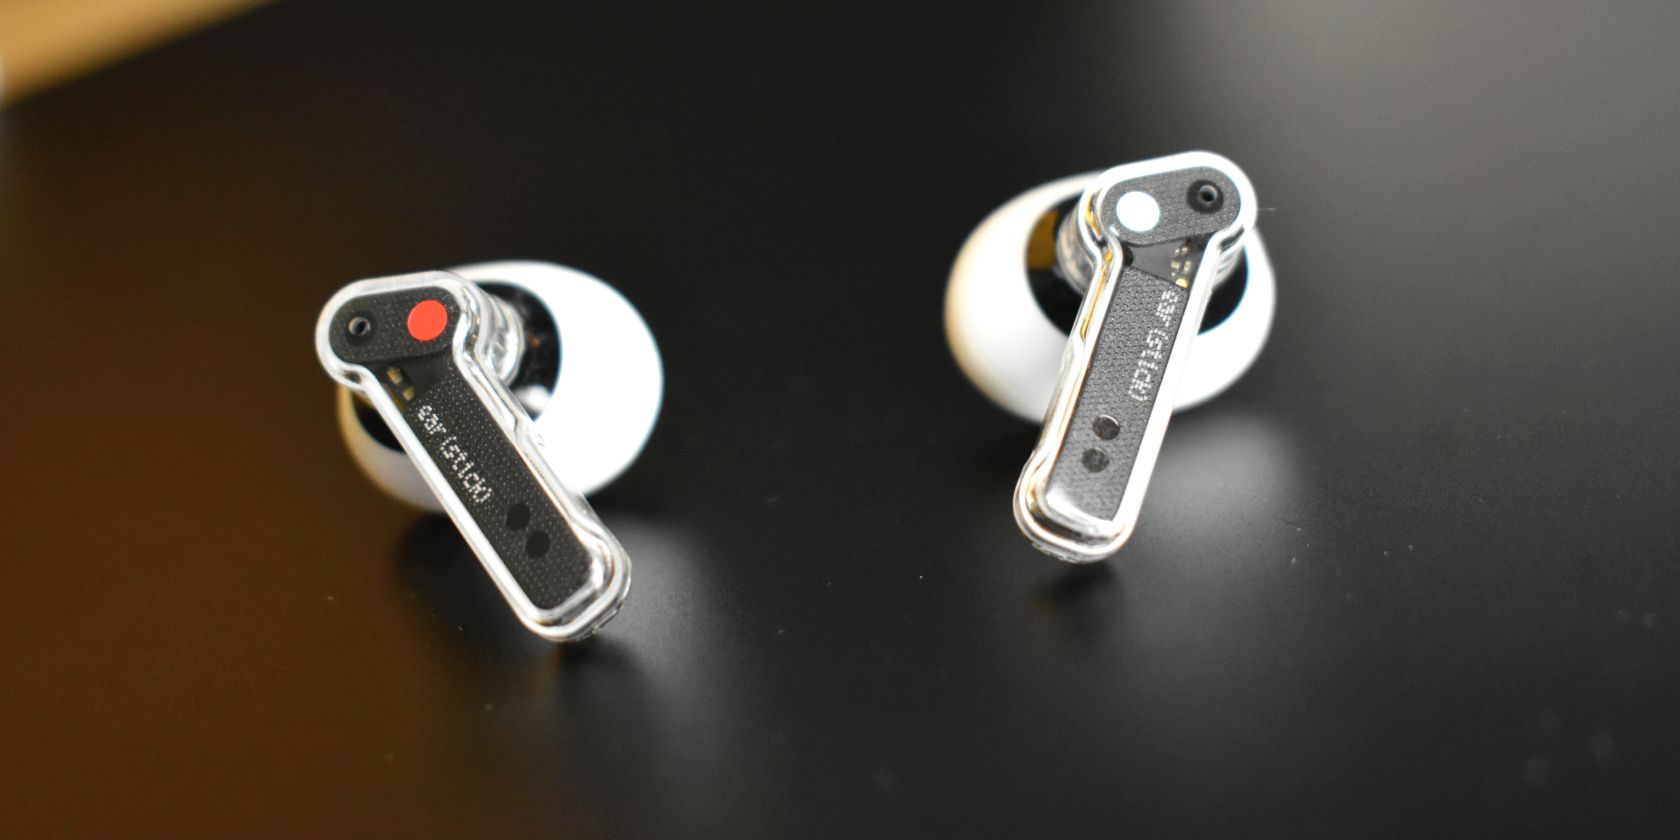 Nothing Ear (Stick) Review: $99 Wireless Earbuds Have Never Been So Fun